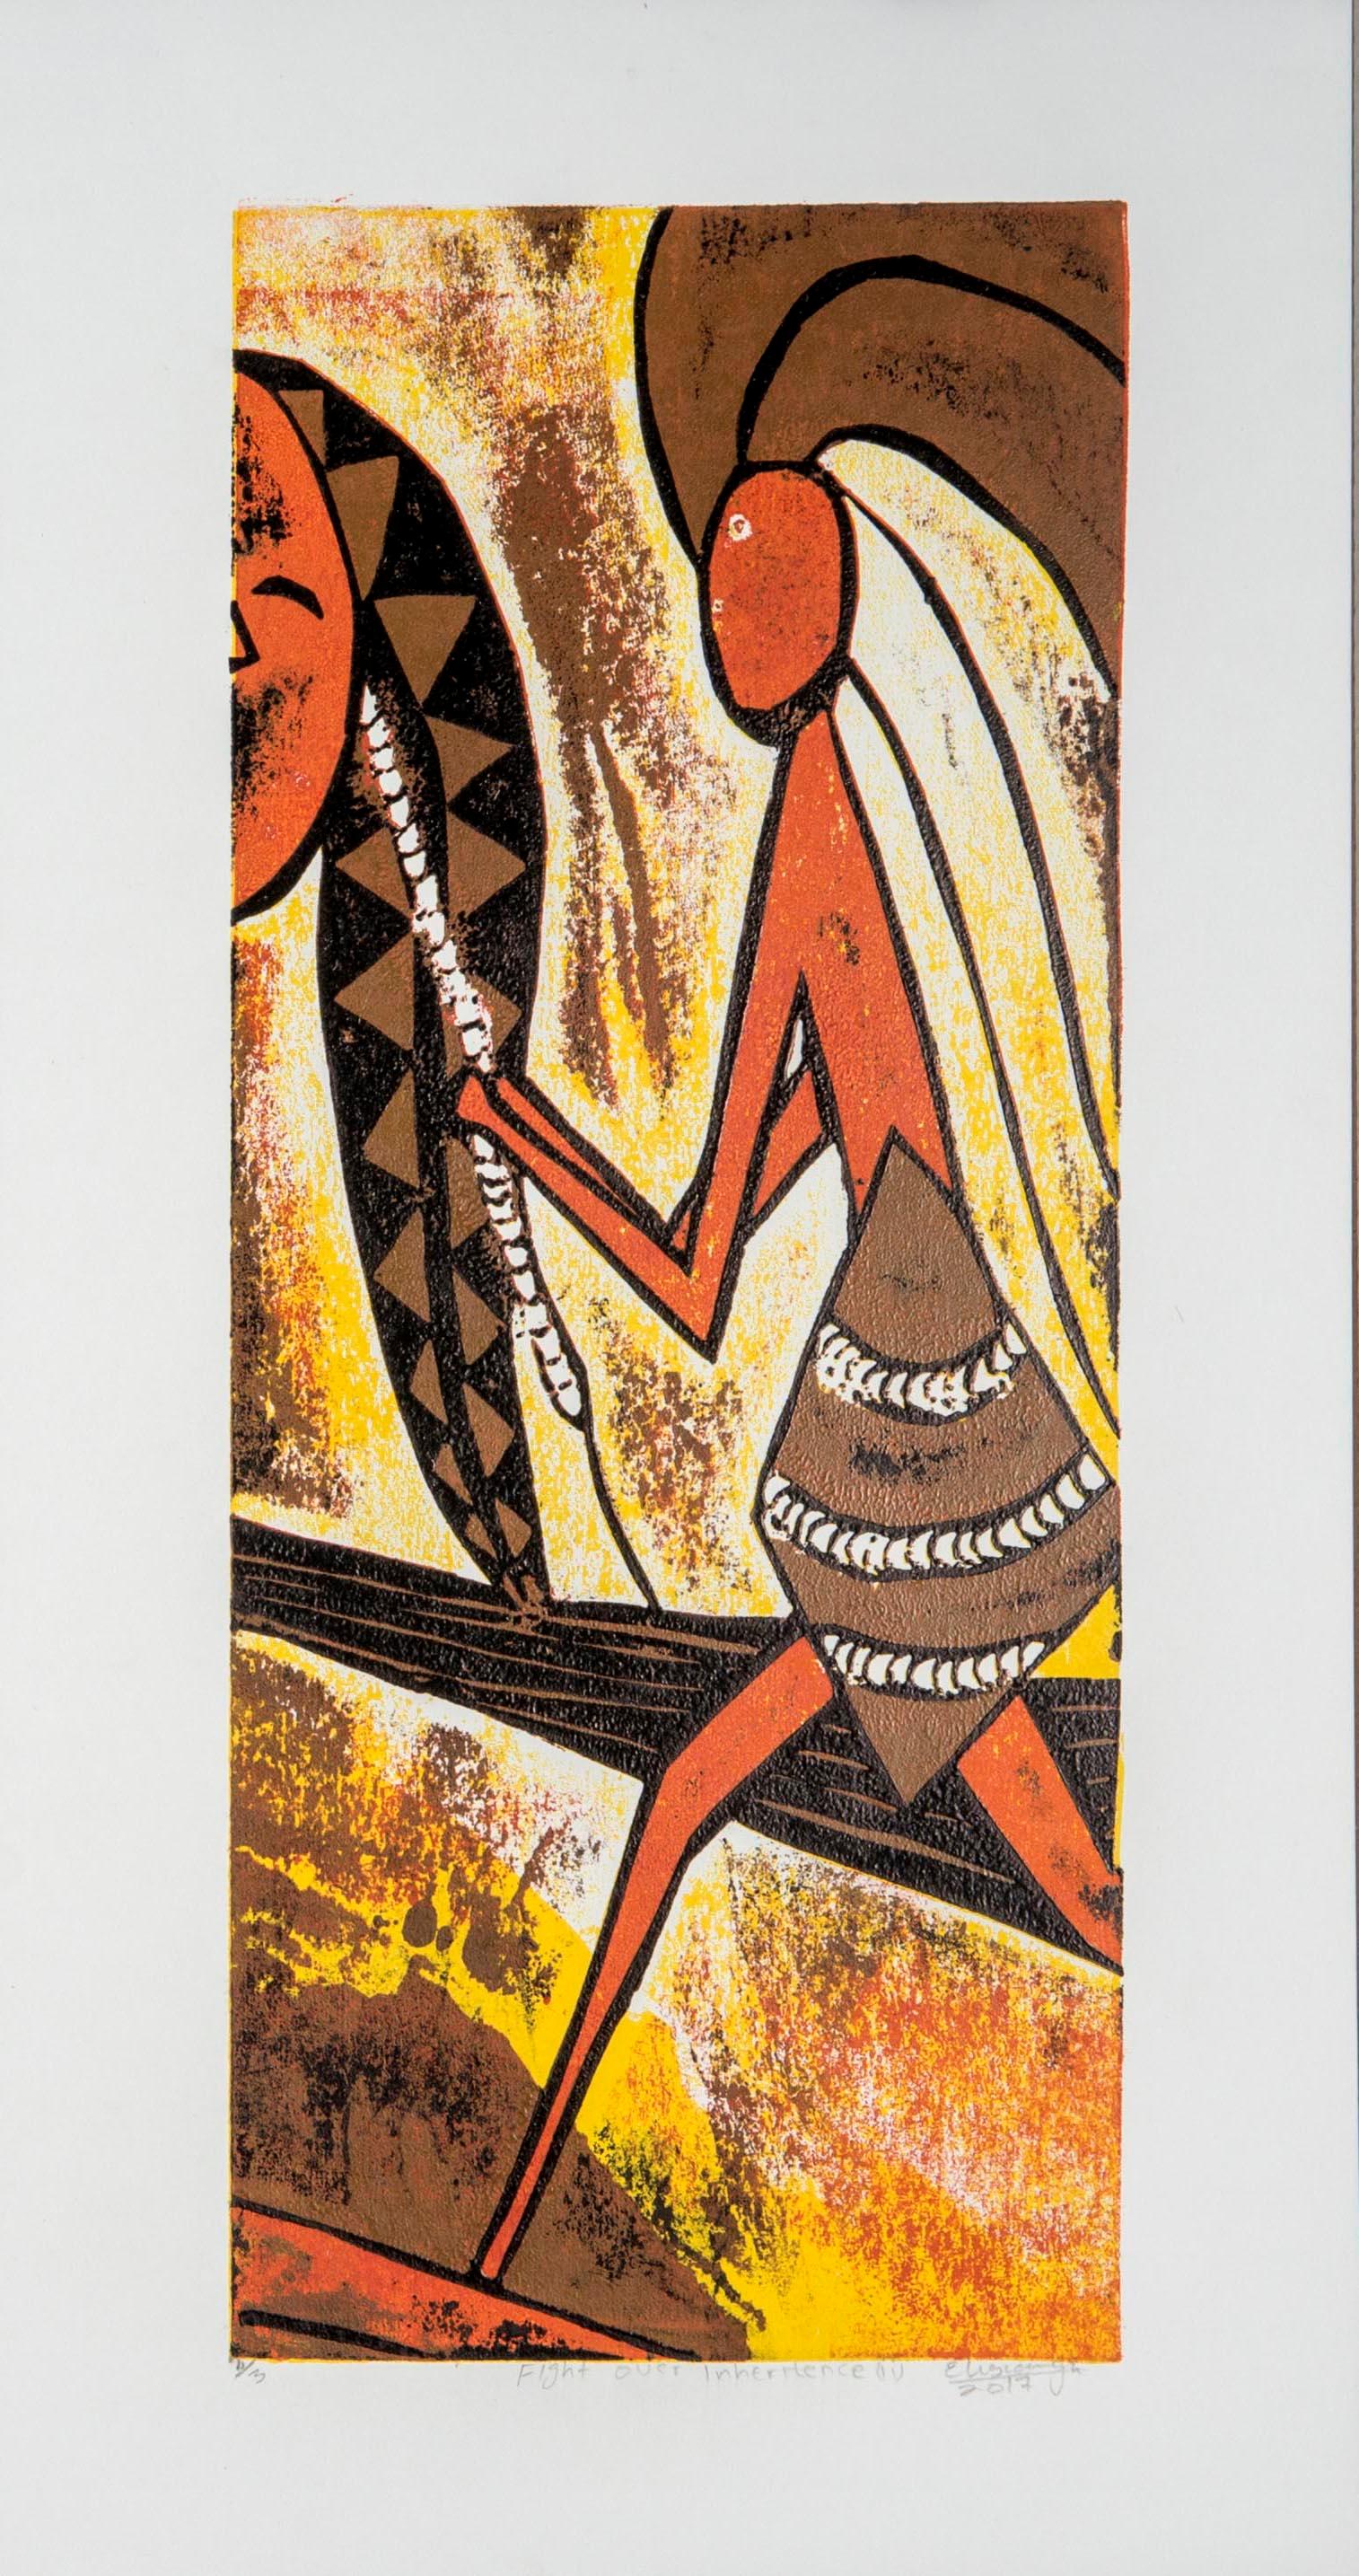 Fight over inheritance (i) & (ii), 2017. Cardboard block print on paper

Elisia Nghidishange was born in Eenhana in northern Namibia. This printmaker, sculptor and mixed media artist graduated from the College of the Arts in Windhoek in 2016.